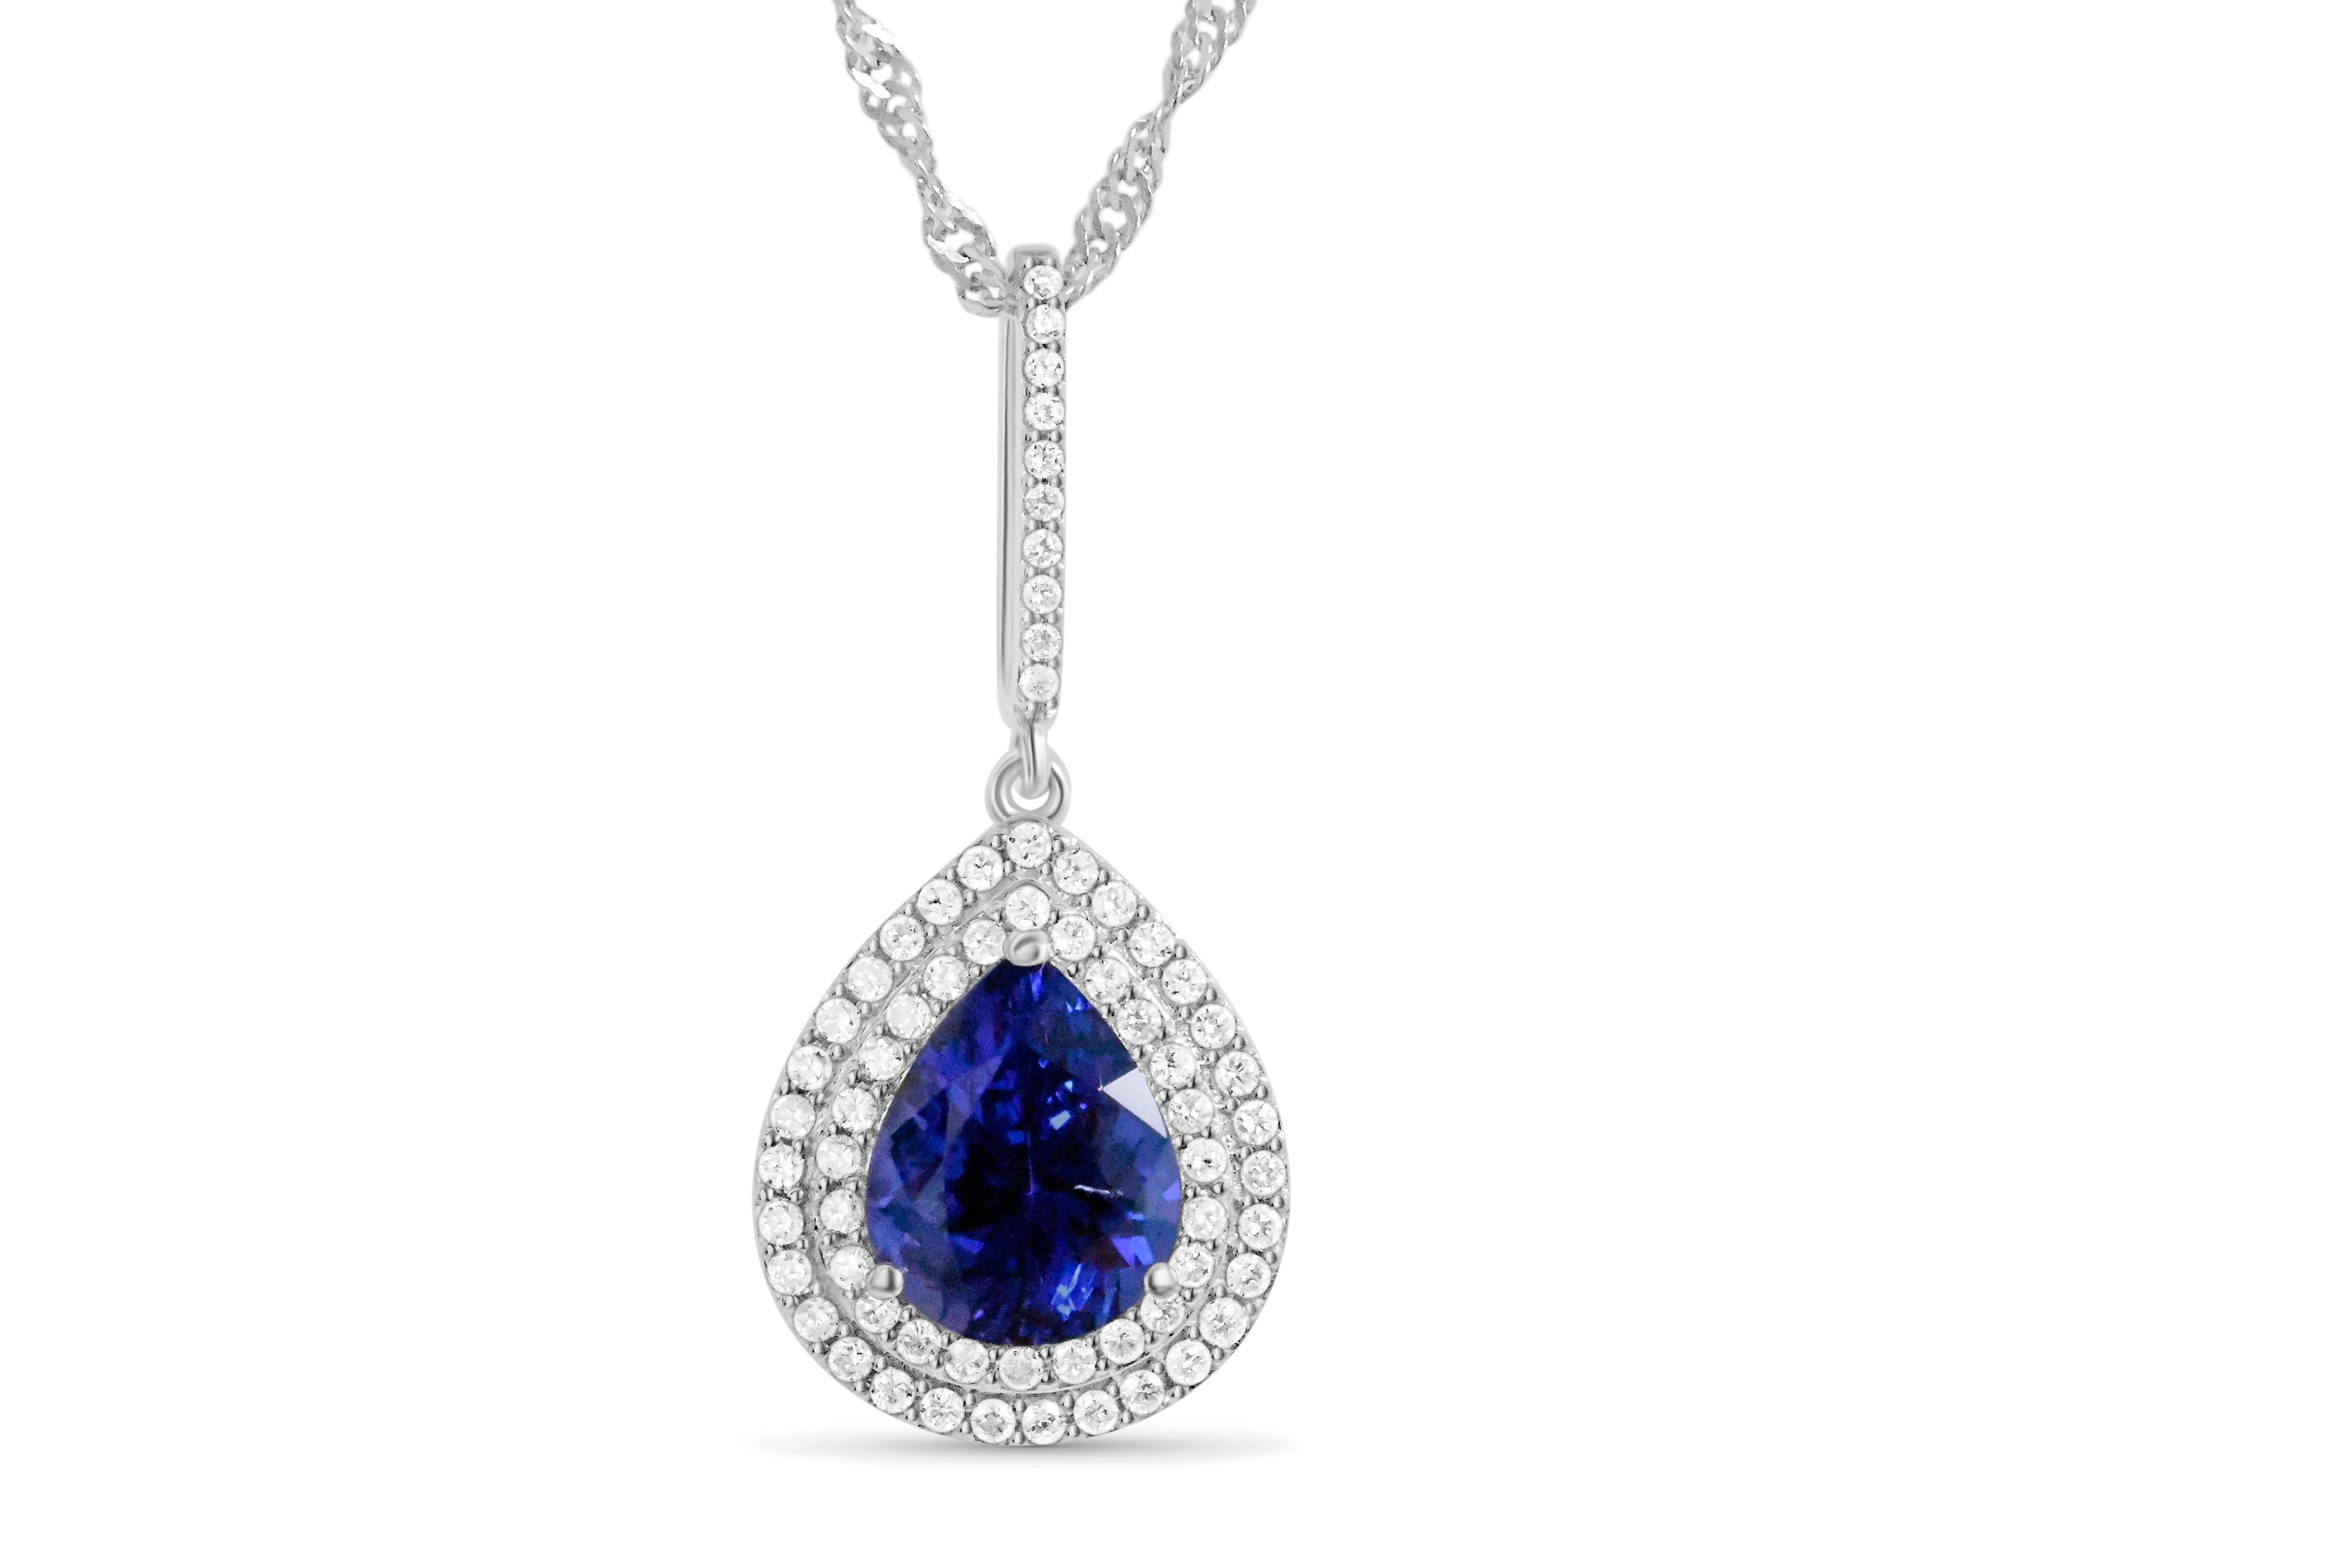 Women's Woman Wedding Tanzanite Pendant Necklace 2.67 cts 14k White Gold . For Sale